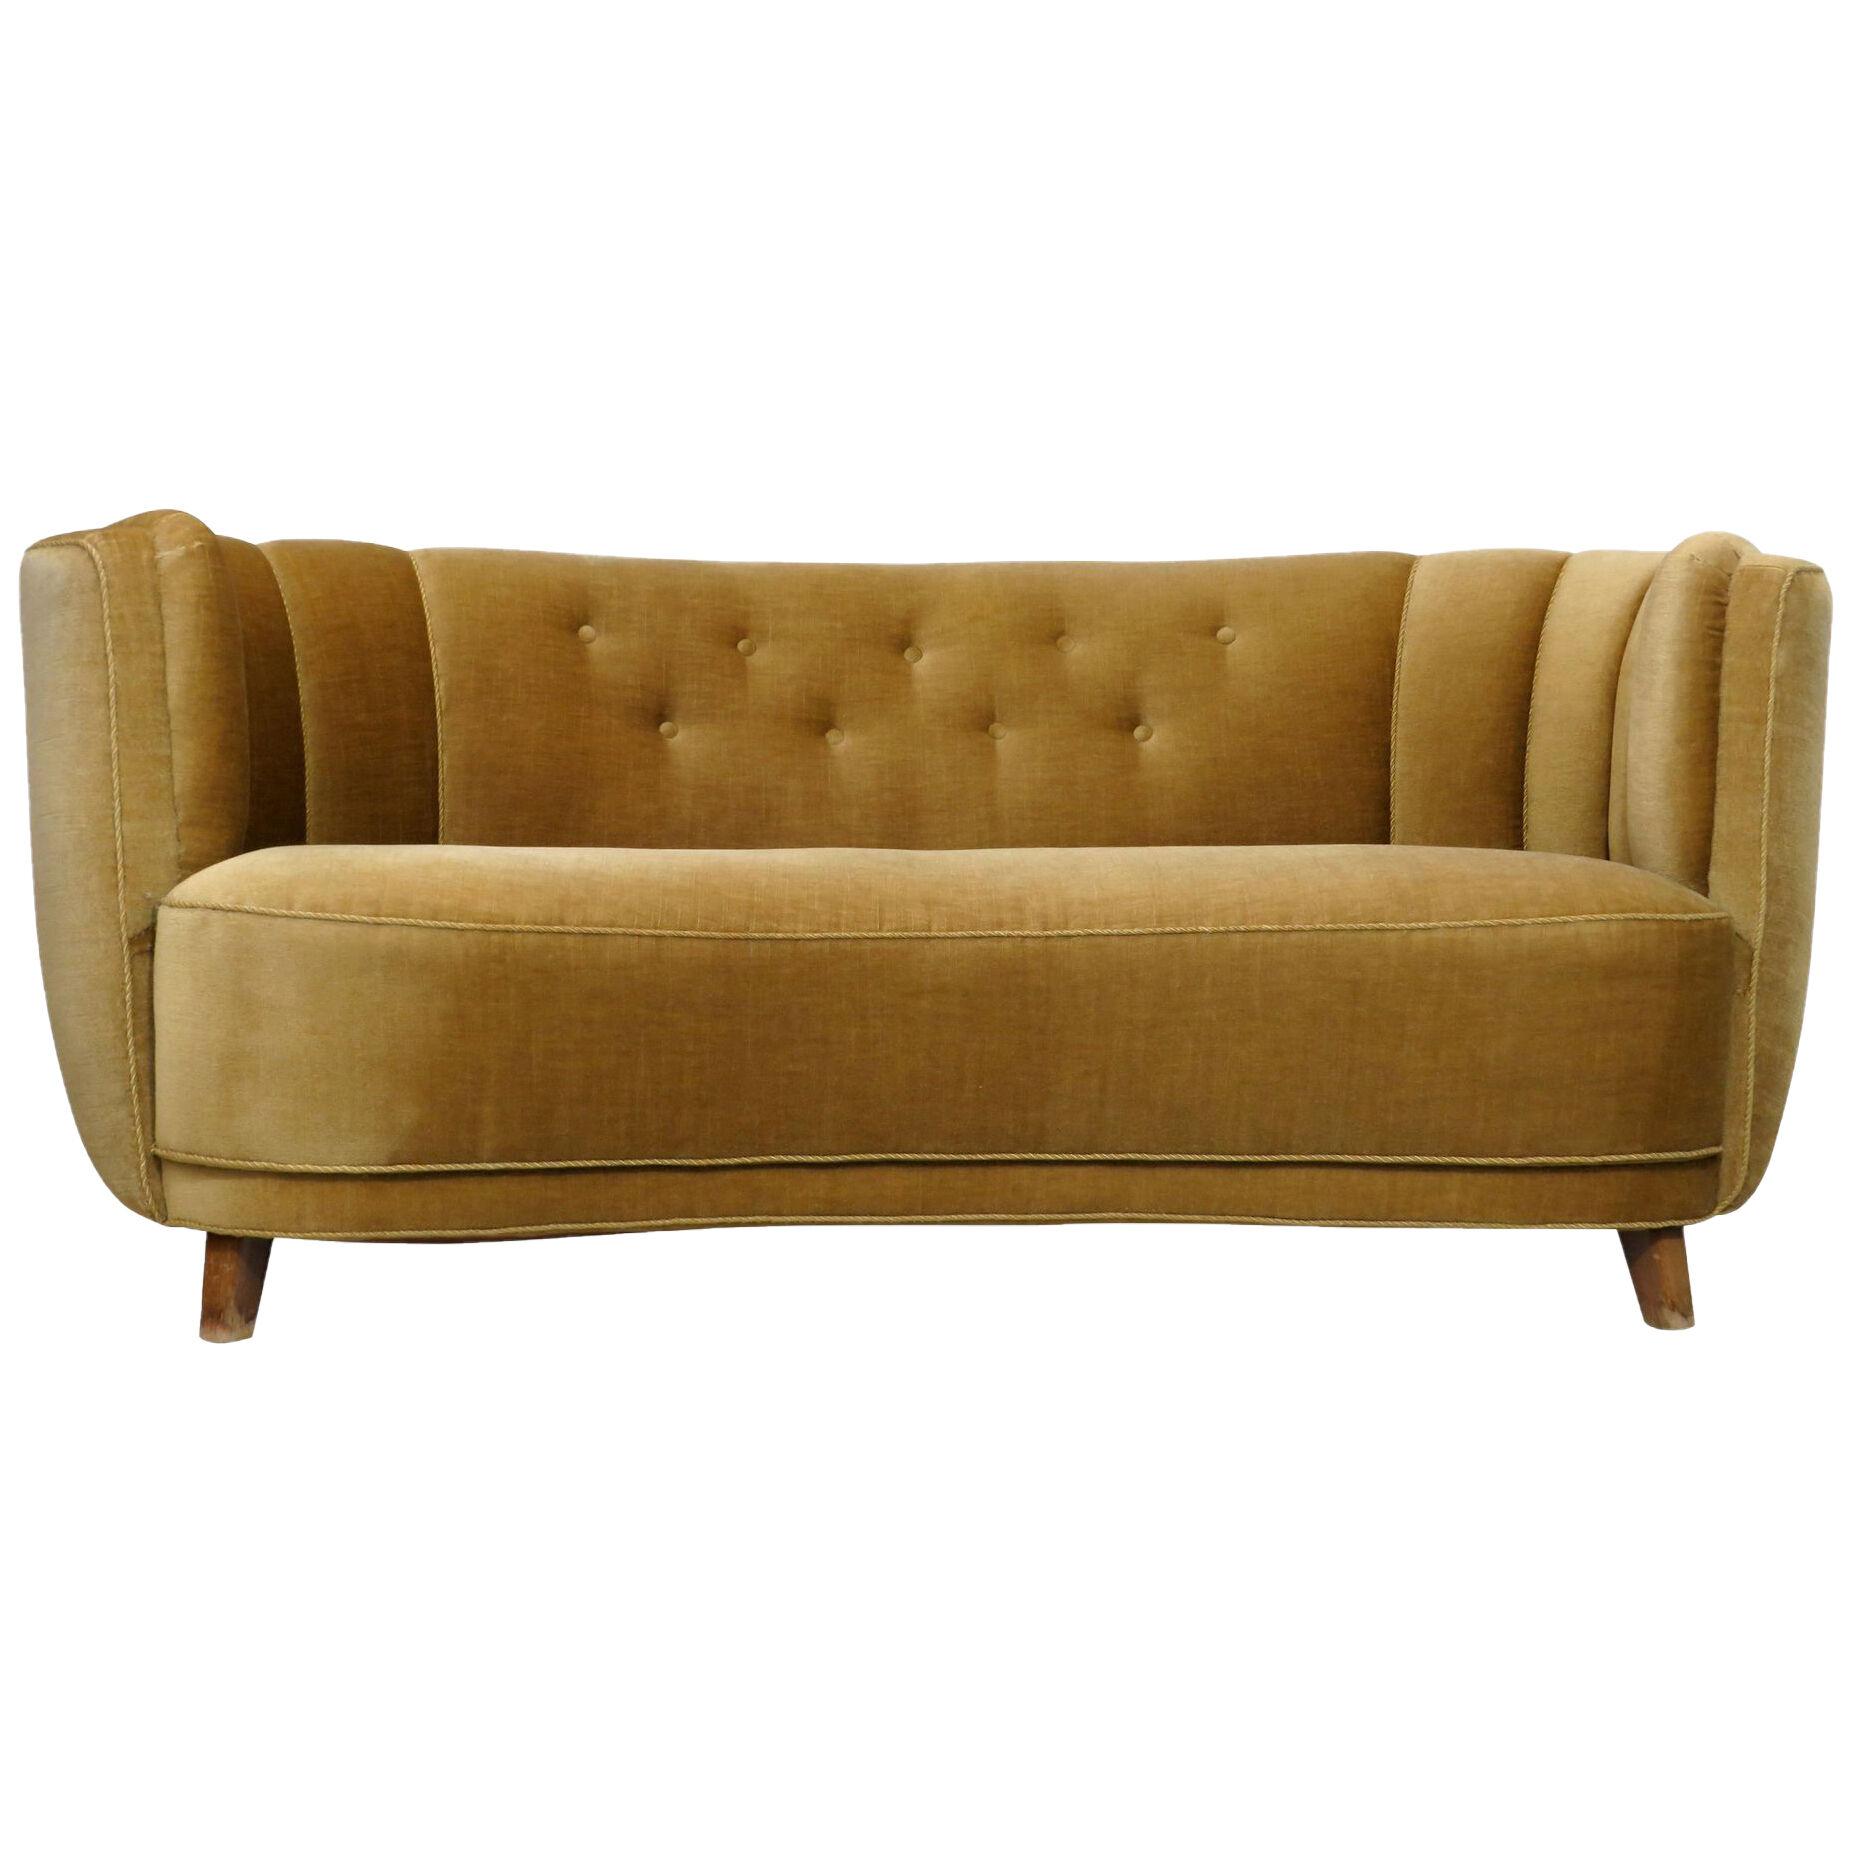 1930's Danish Deco Sofa in Original Mohair with Button Tufted Back